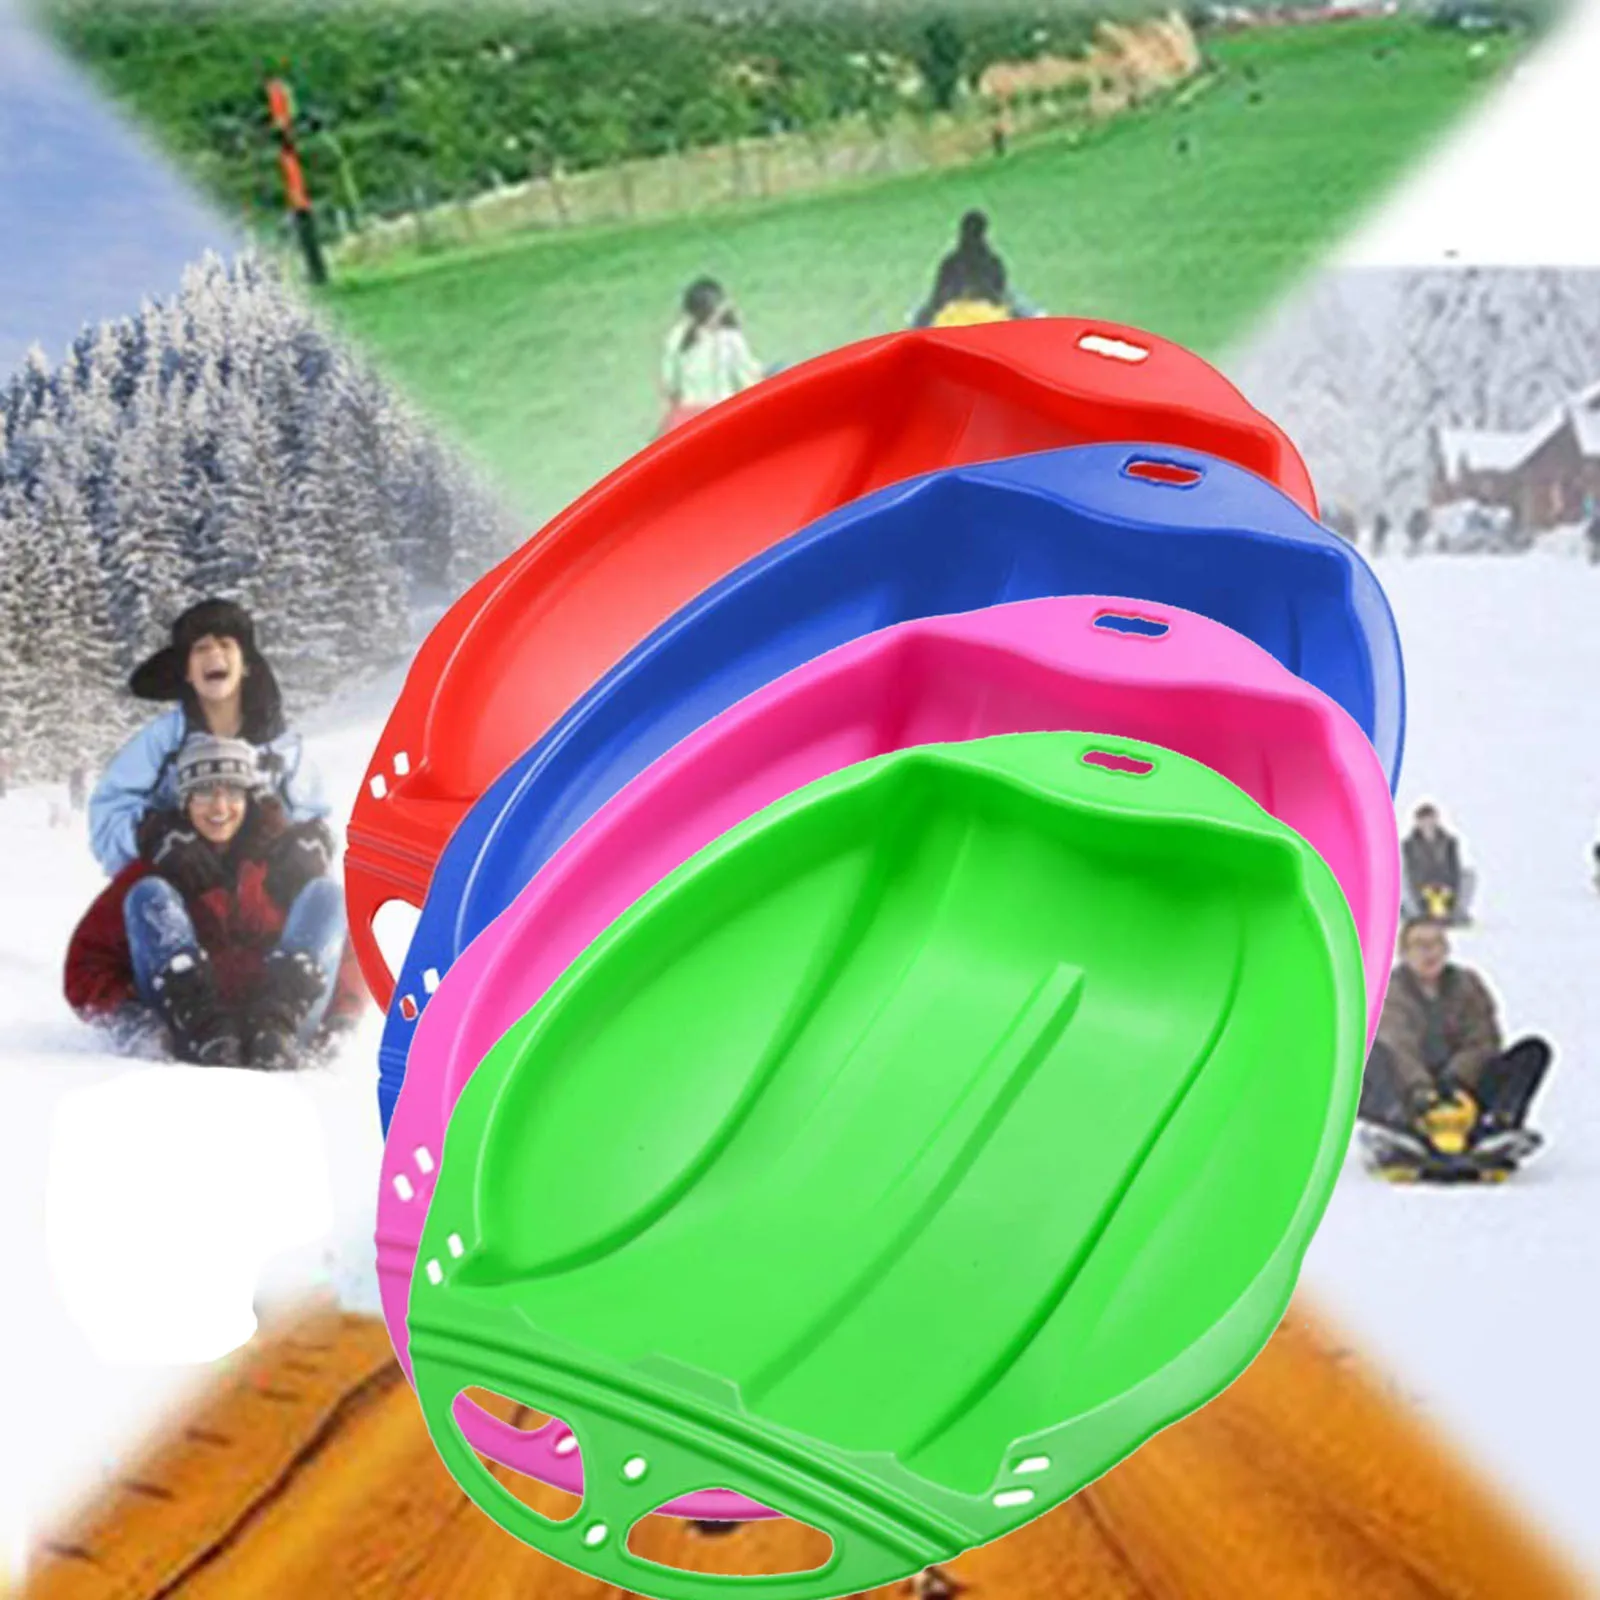 

2021 New Kids And Adult Round Sand Slider Disc Toy Snow Sled Ski Pad Board Grass Skiing Snowboard Skiing Sleigh Ski Pad Board